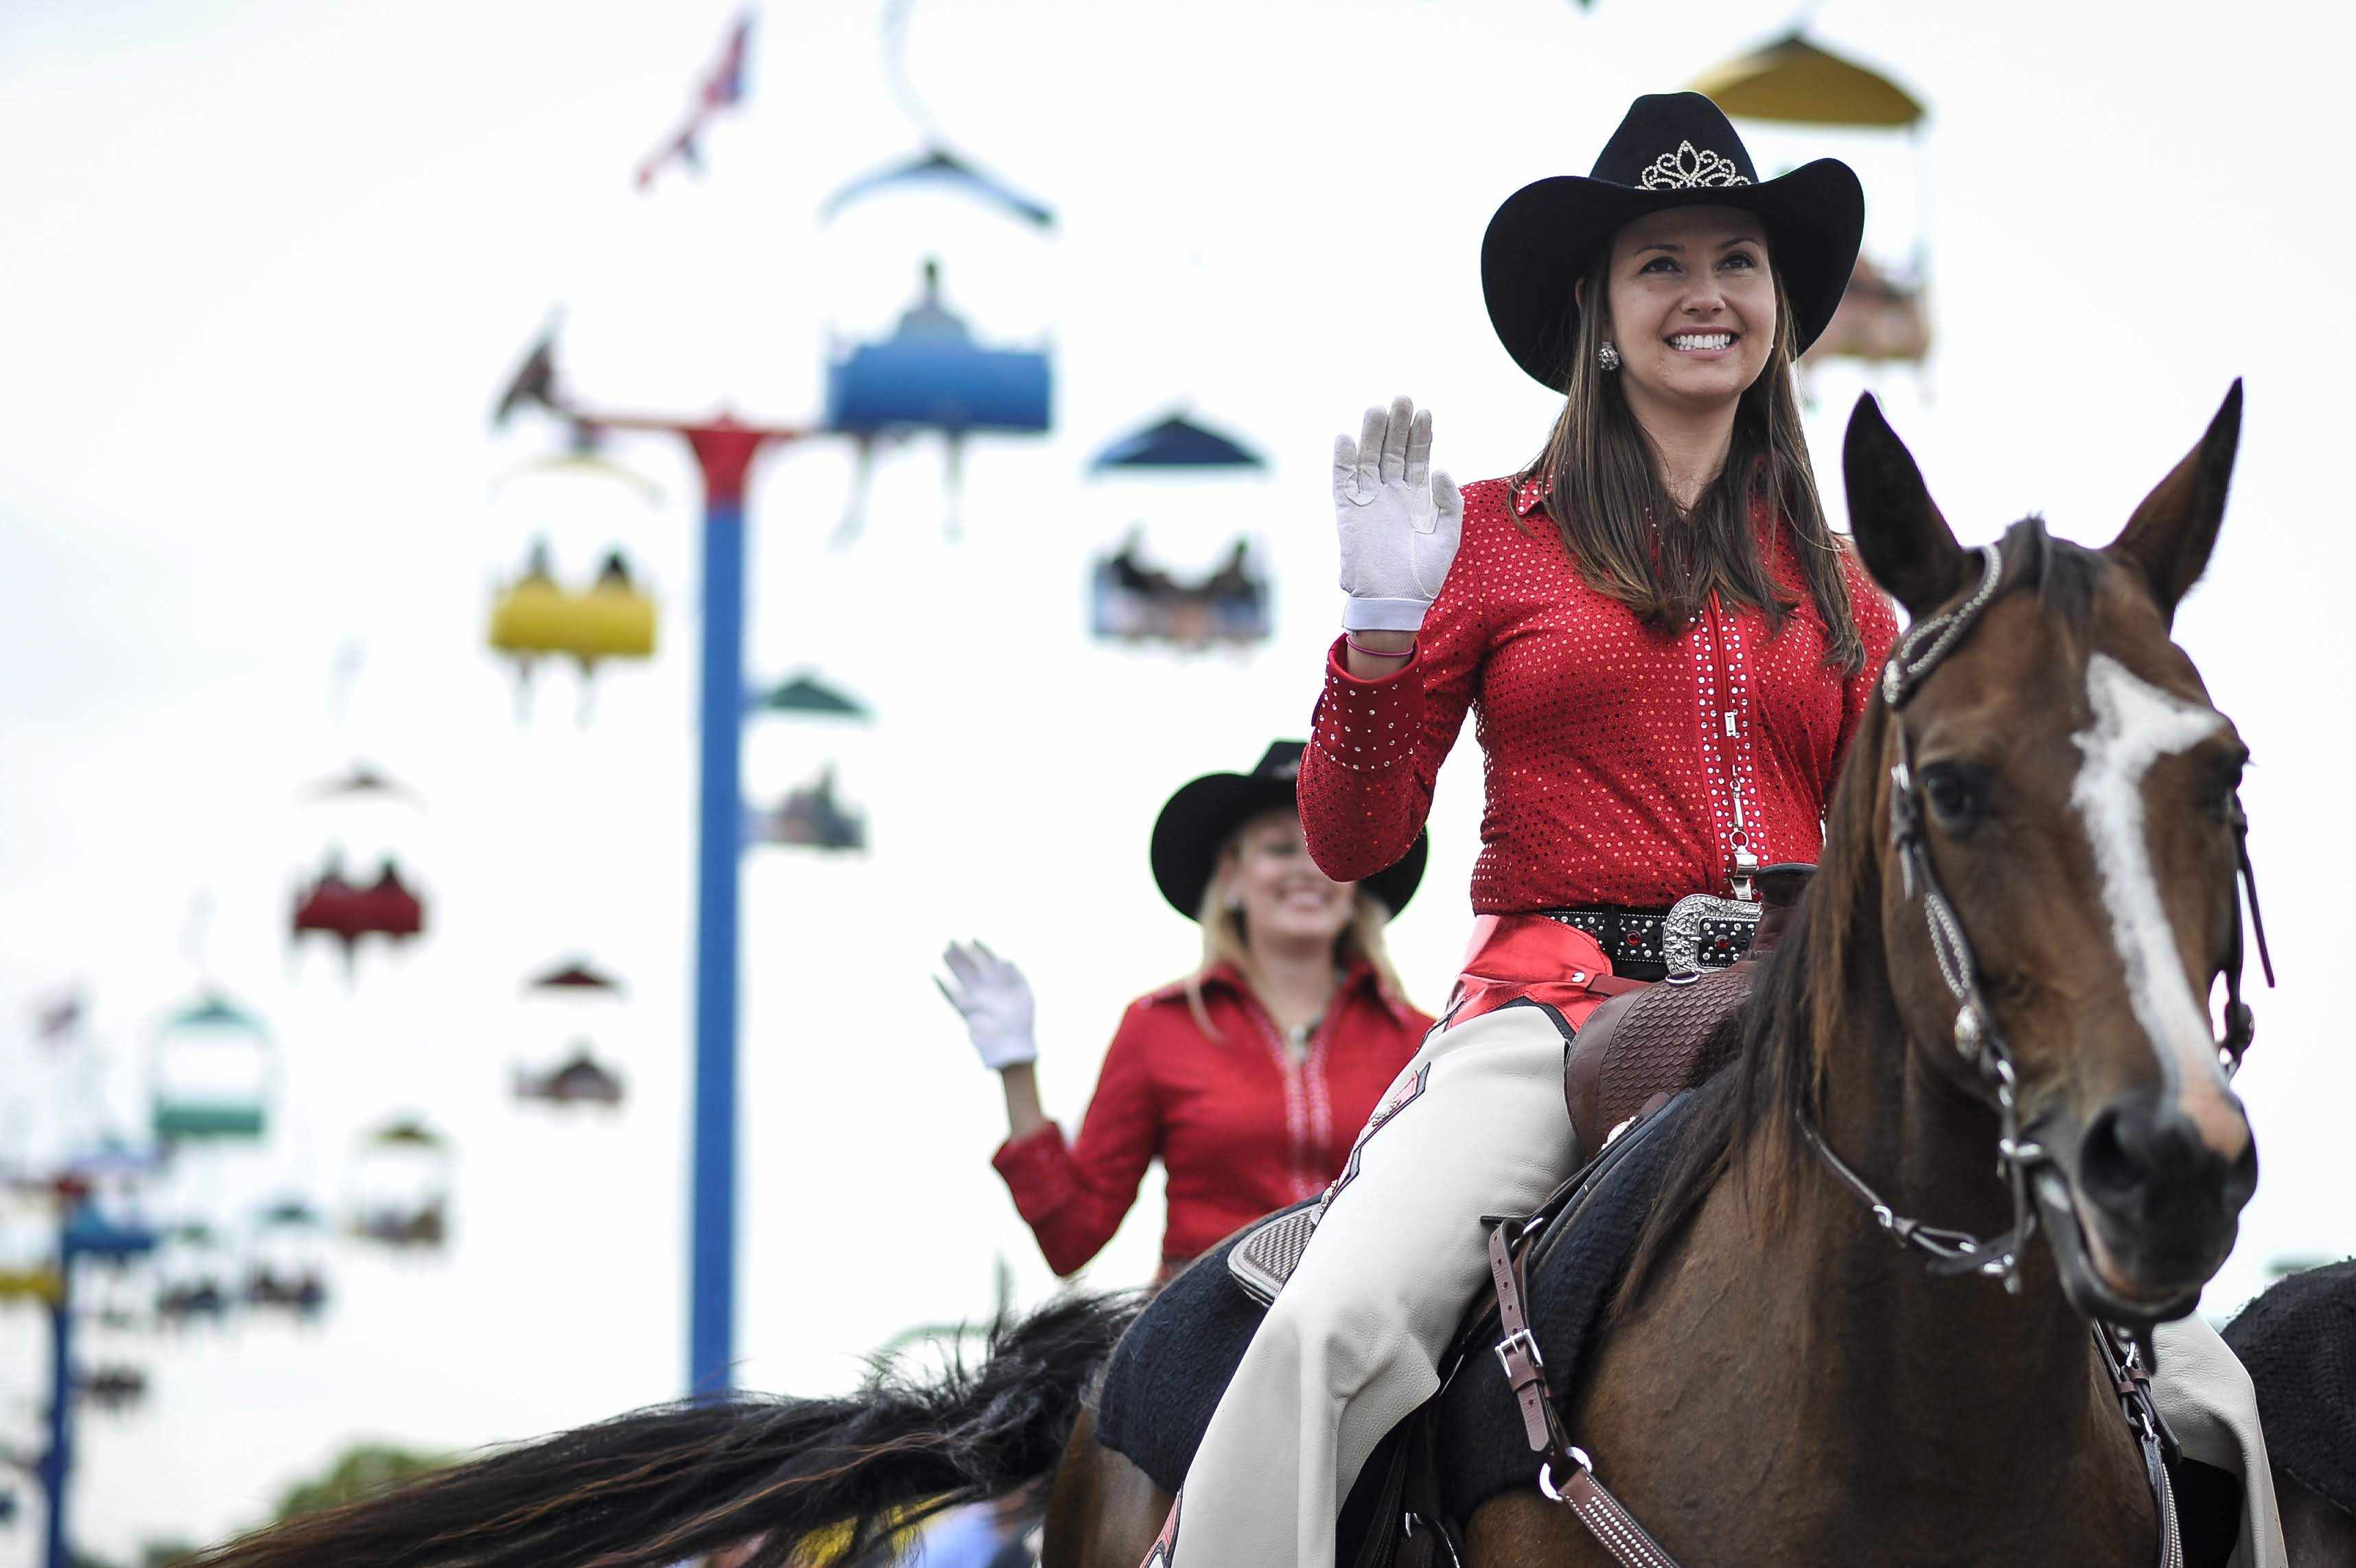 A Quest For The Best: State Fairs In The U.S.